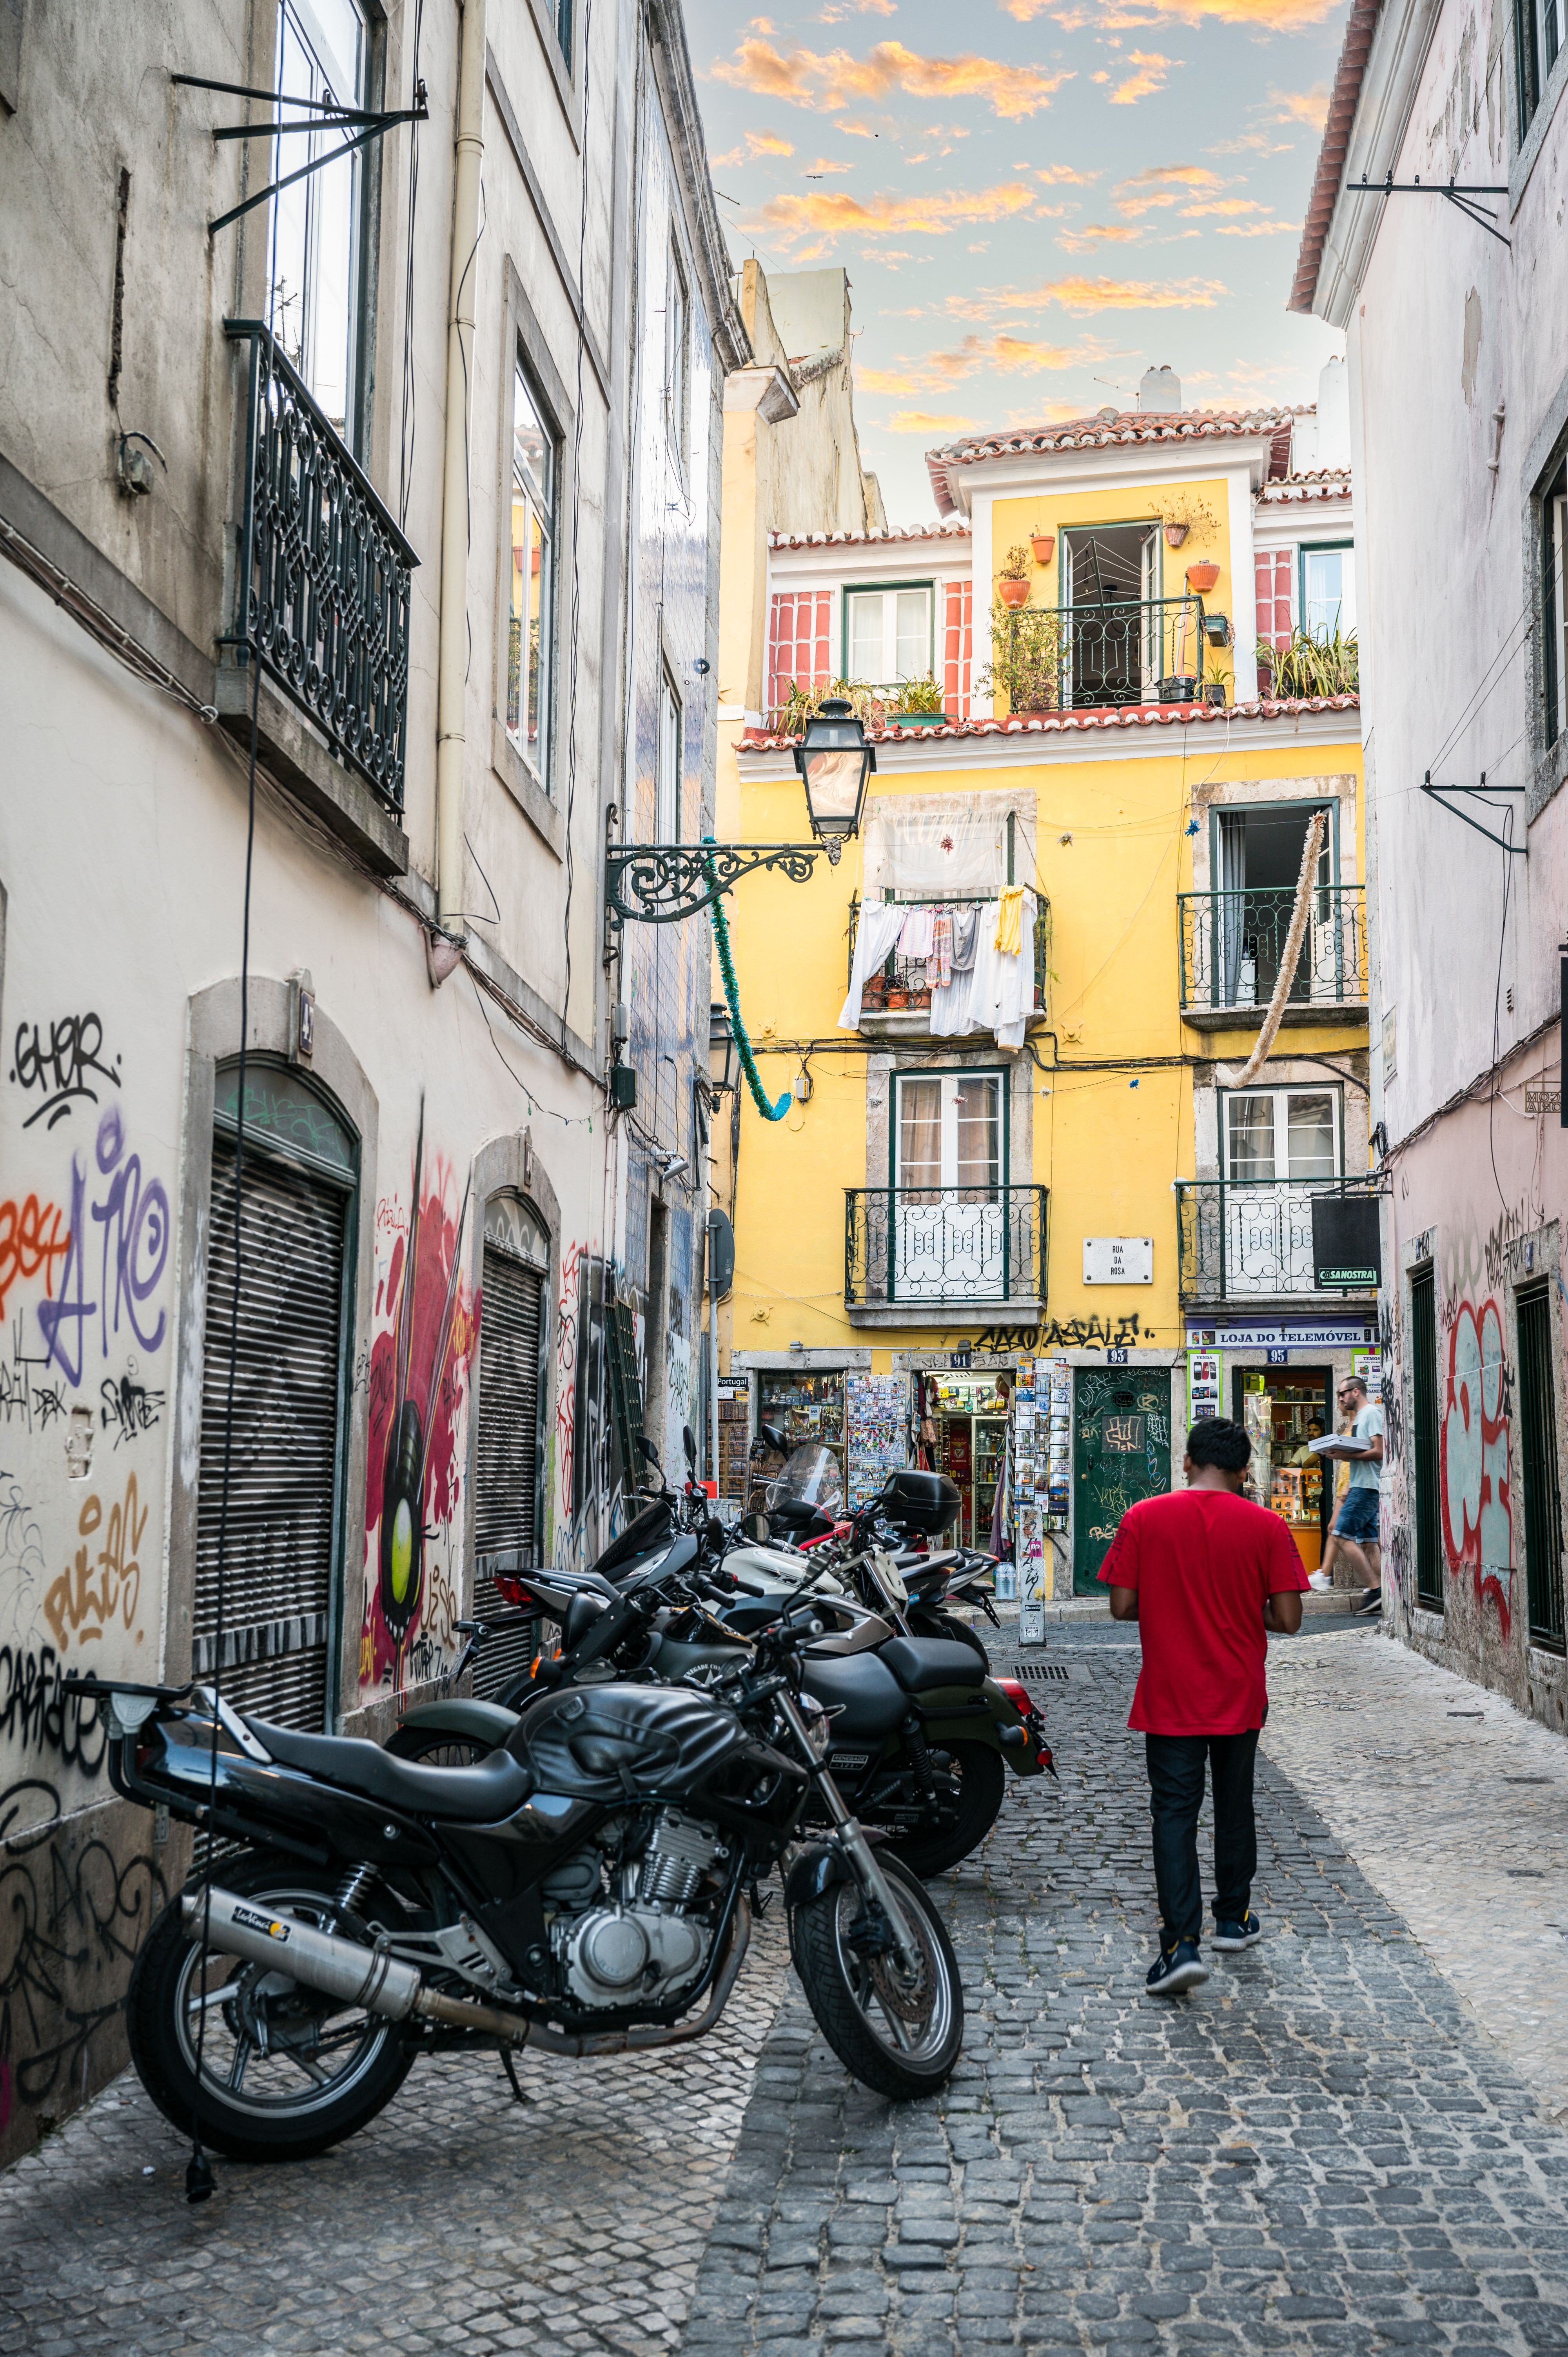 Cobblestone street in Lisbon Portugal with man walking in red shirt and yellow building